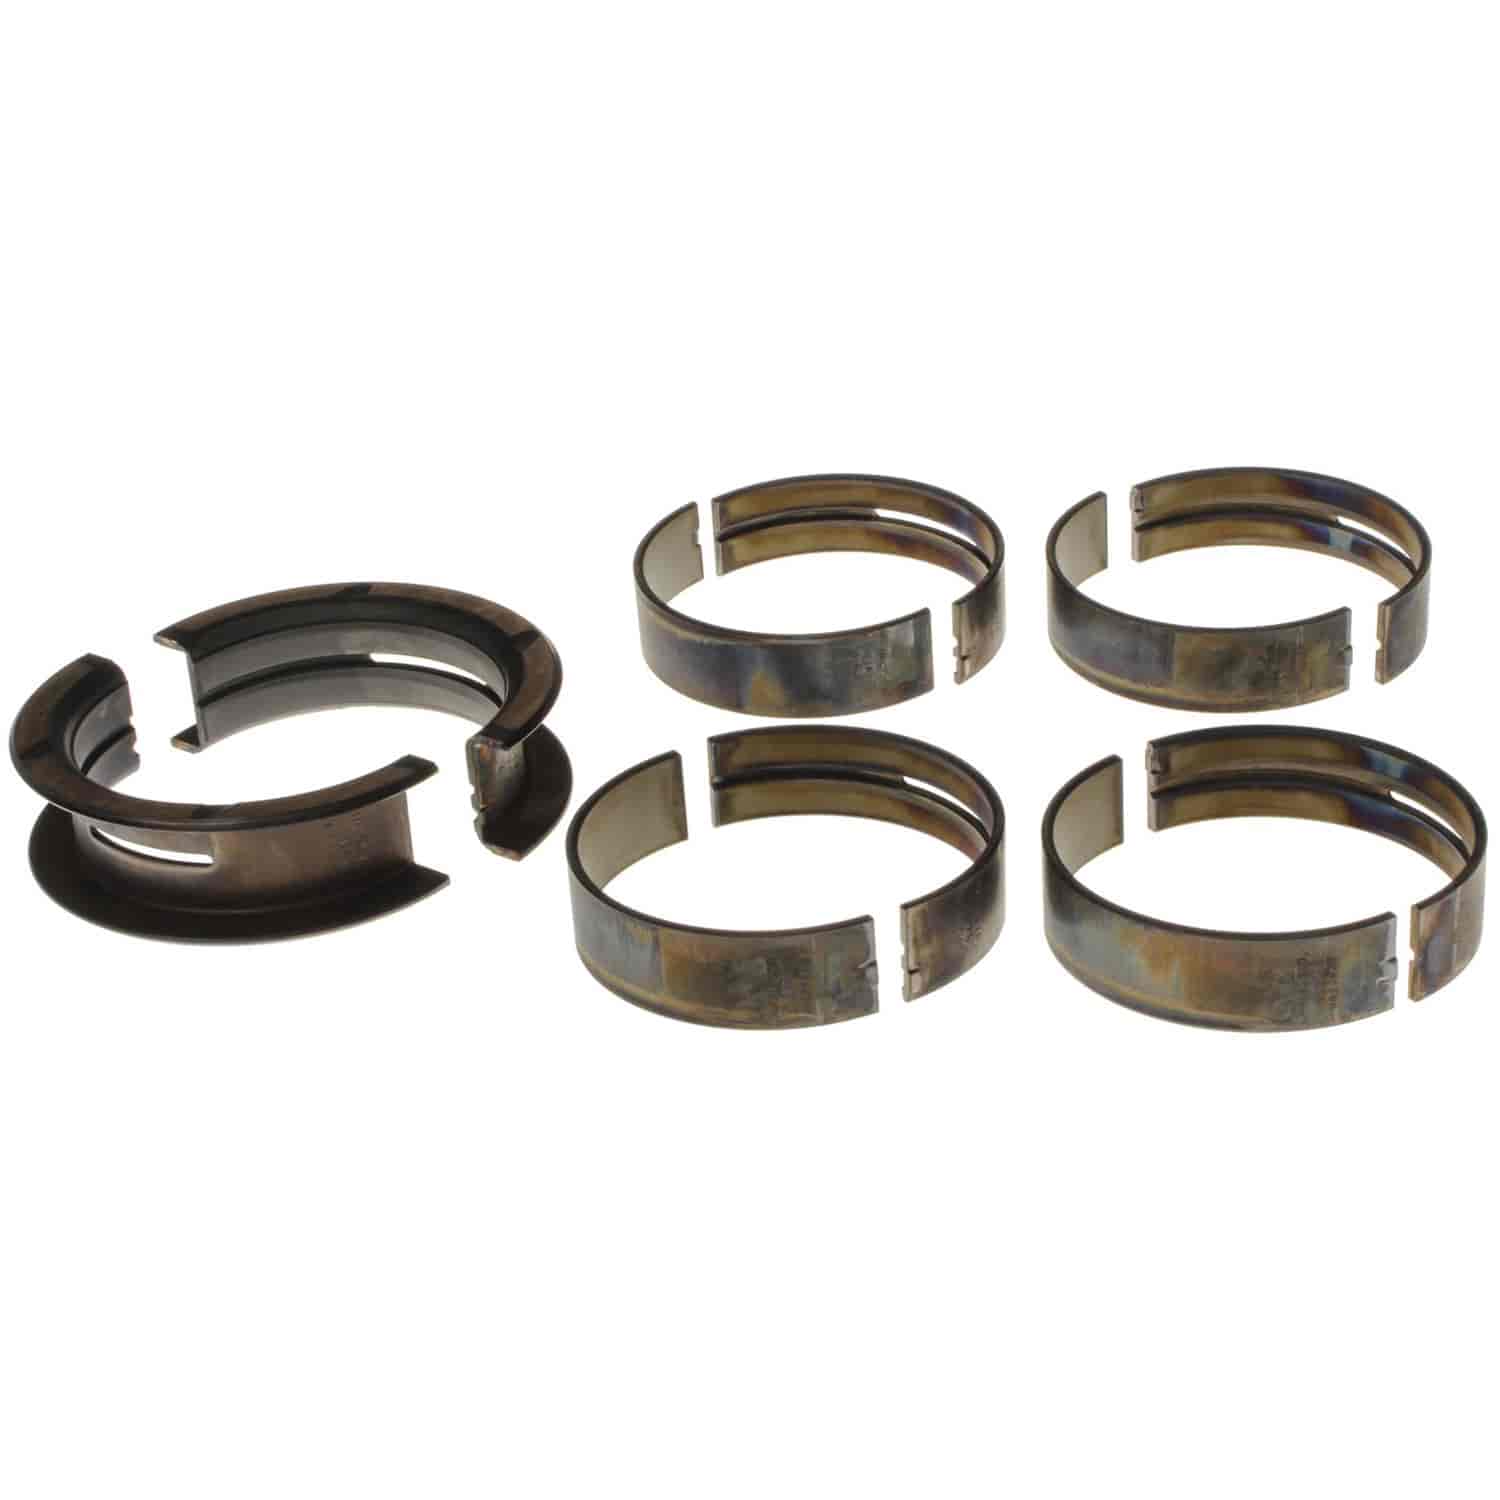 Main Bearing Set Ford 1971-1997 V8 351W/351M/400 (5.8/6.6L) with -.011" Undersize